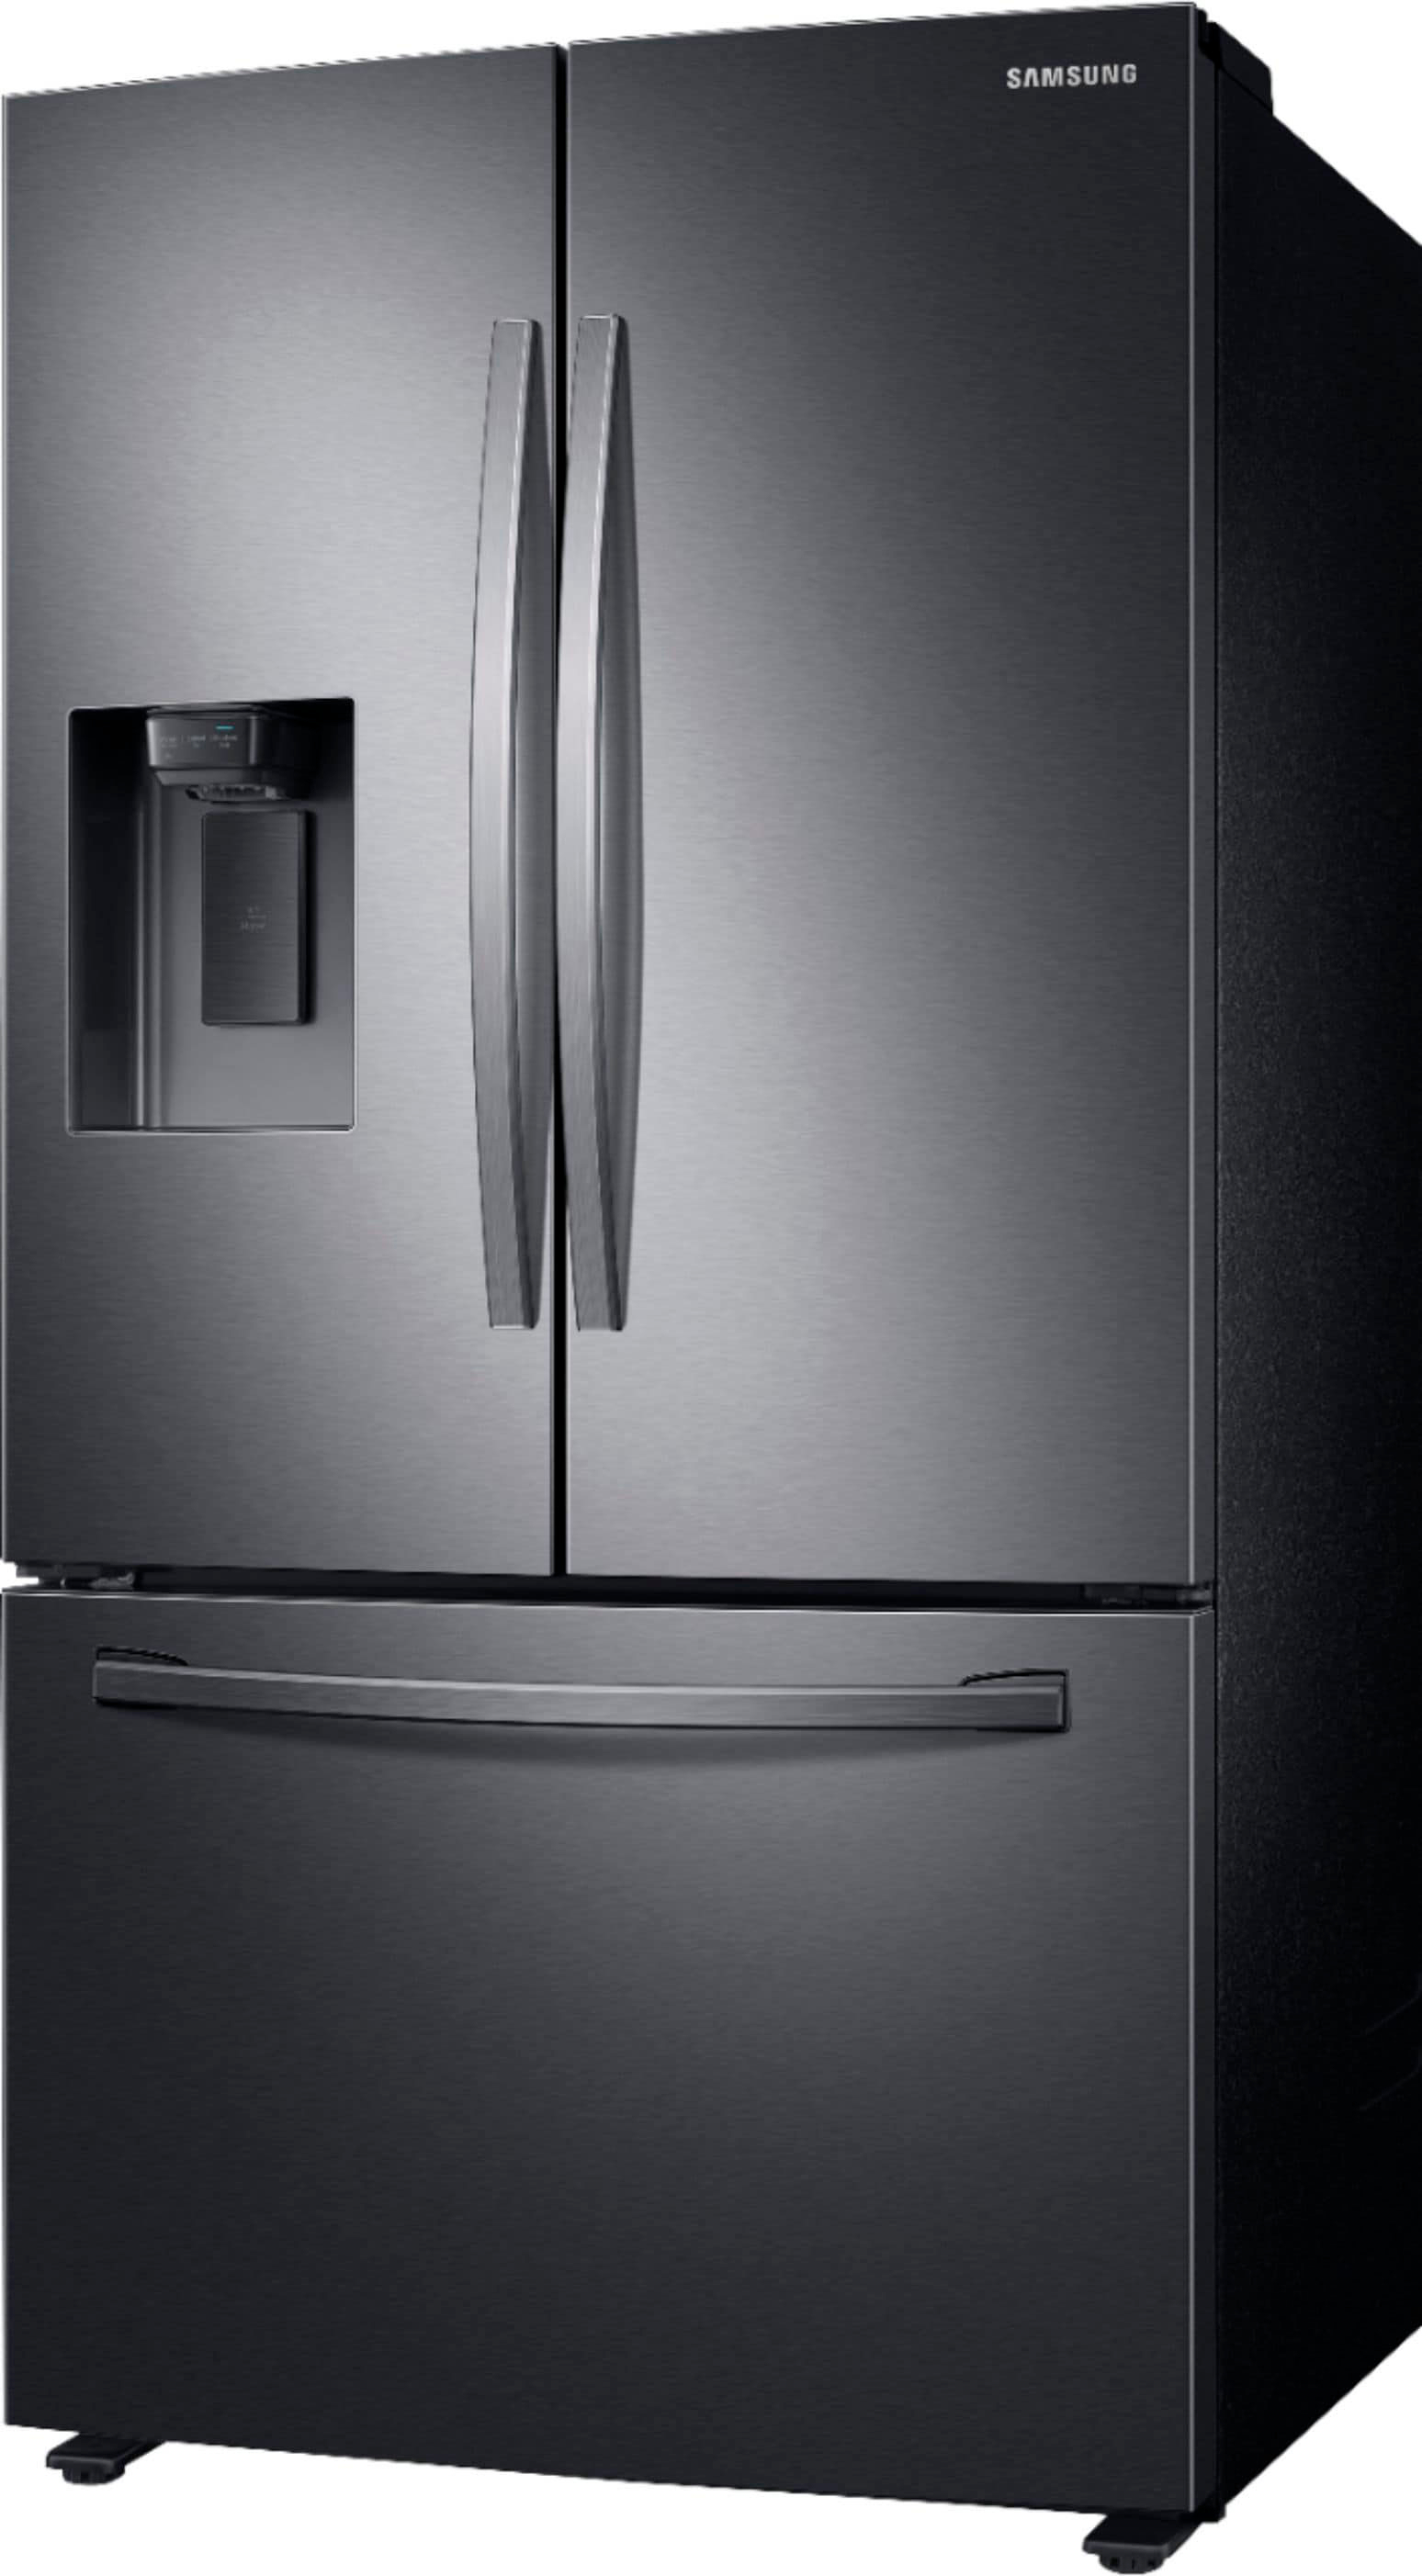 Angle View: Samsung - Geek Squad Certi Refurb 27 cu. ft. Large Capacity 3-Door French Door Refrigerator with External Water & Ice Dispenser - Black stainless steel